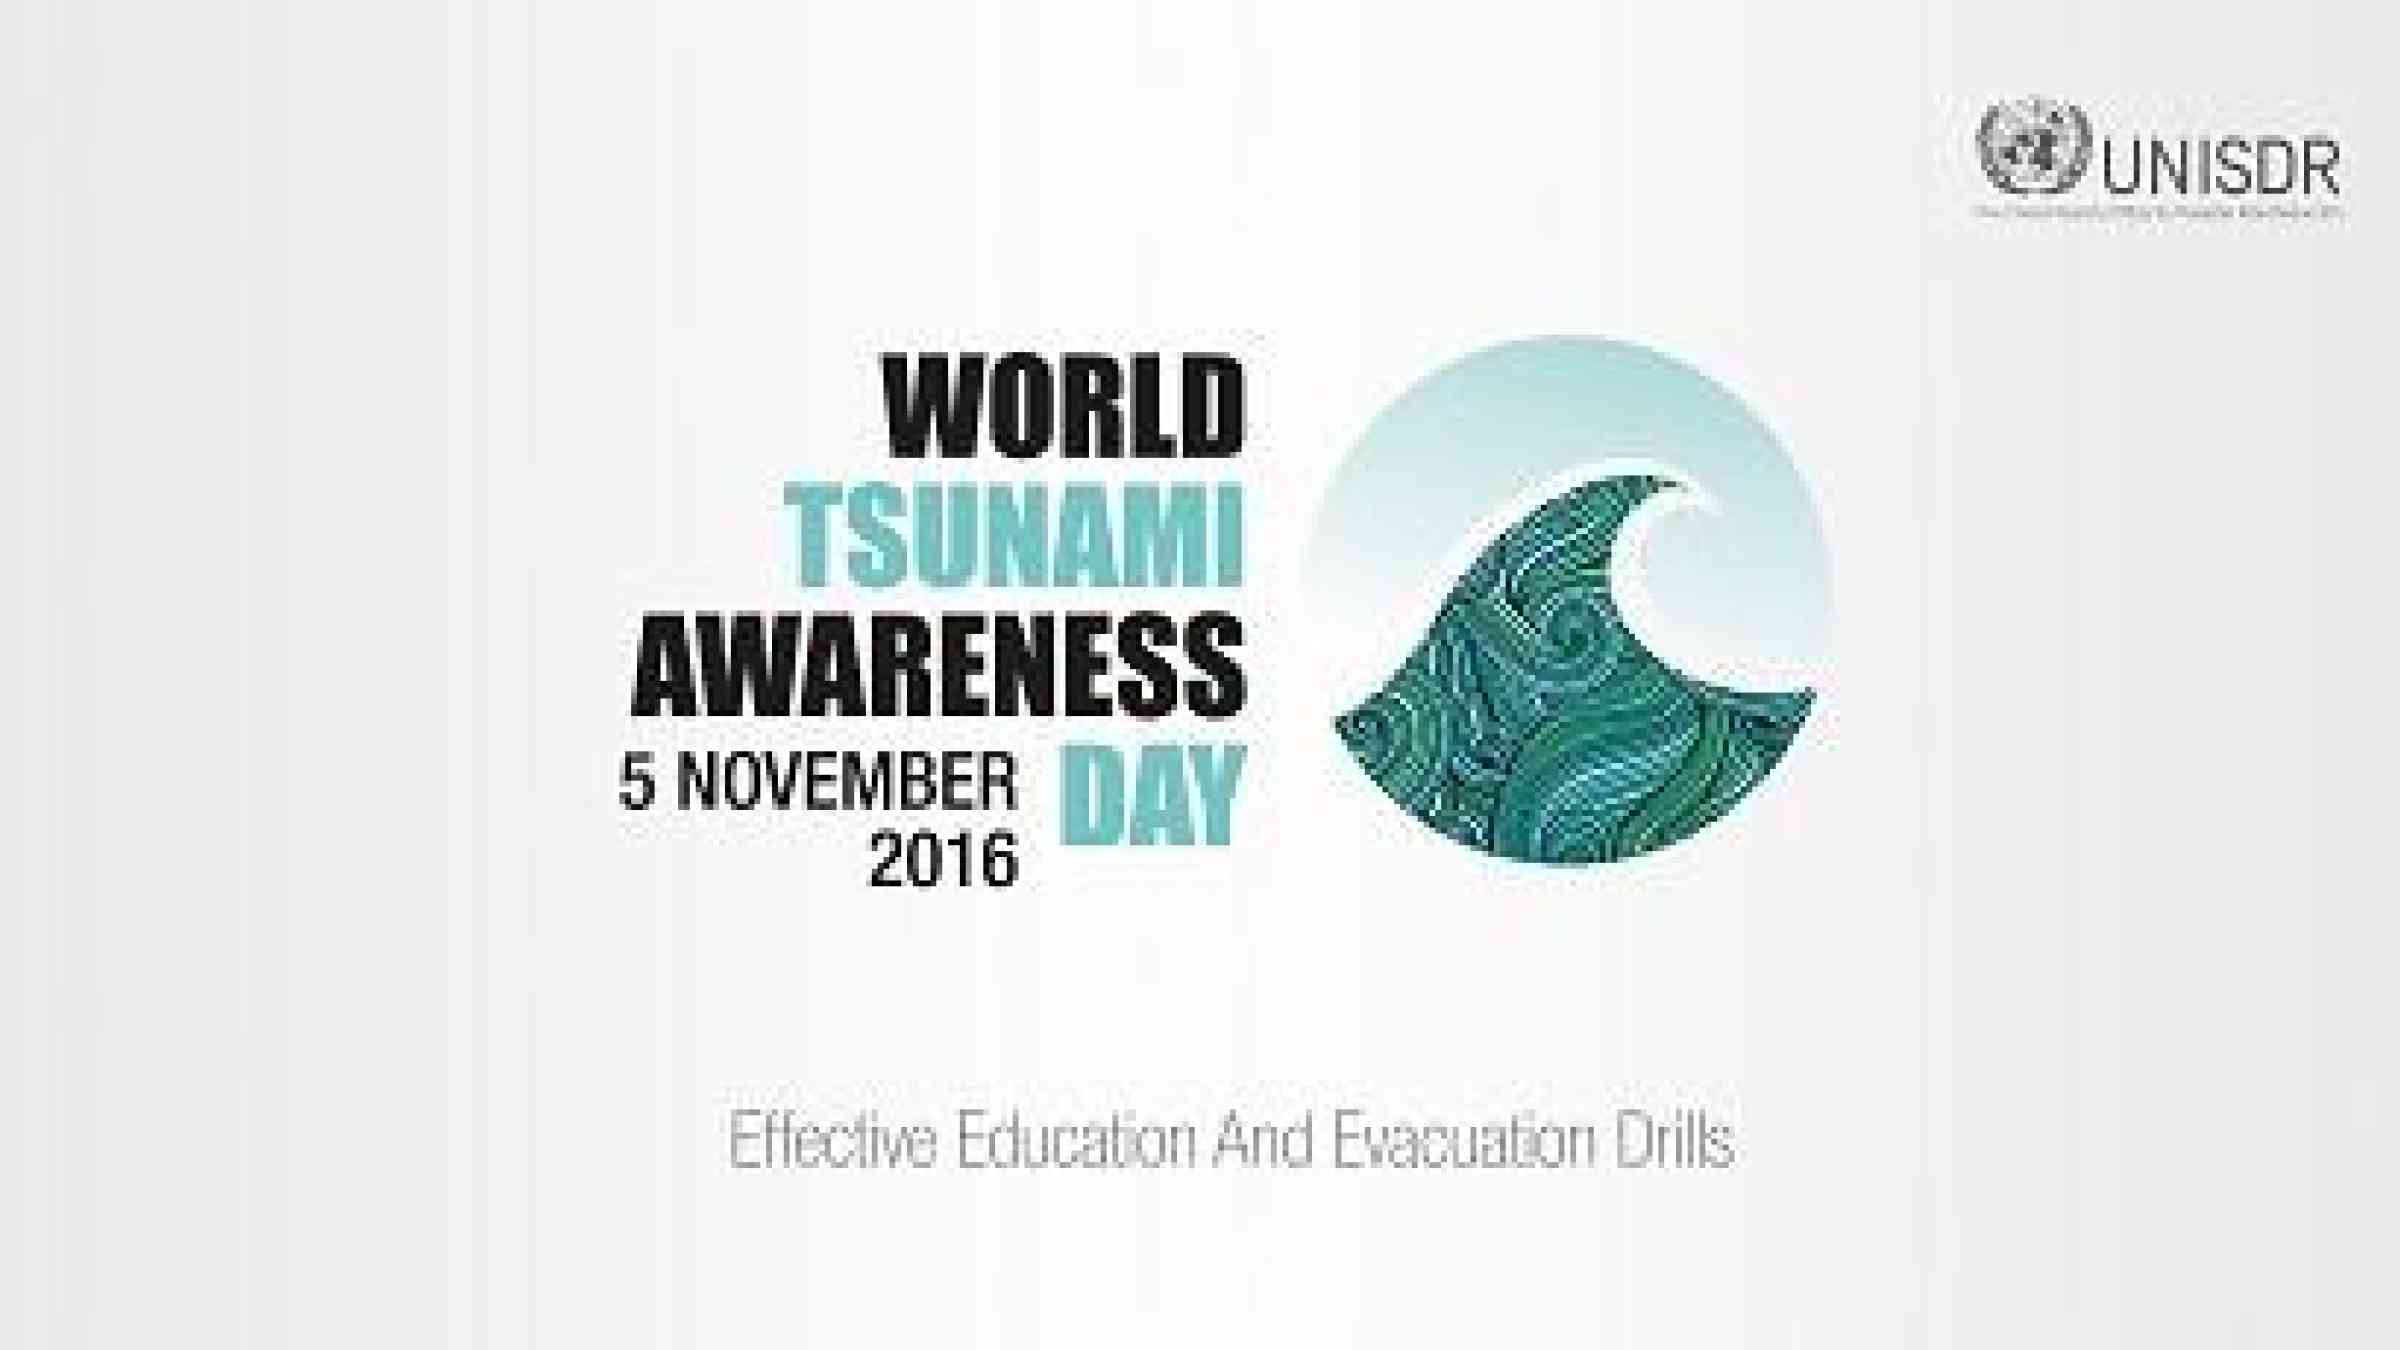 The theme of the first edition of World Tsunami Awareness Day is education and evacuation (Photo: UNISDR/Ramon Valle)